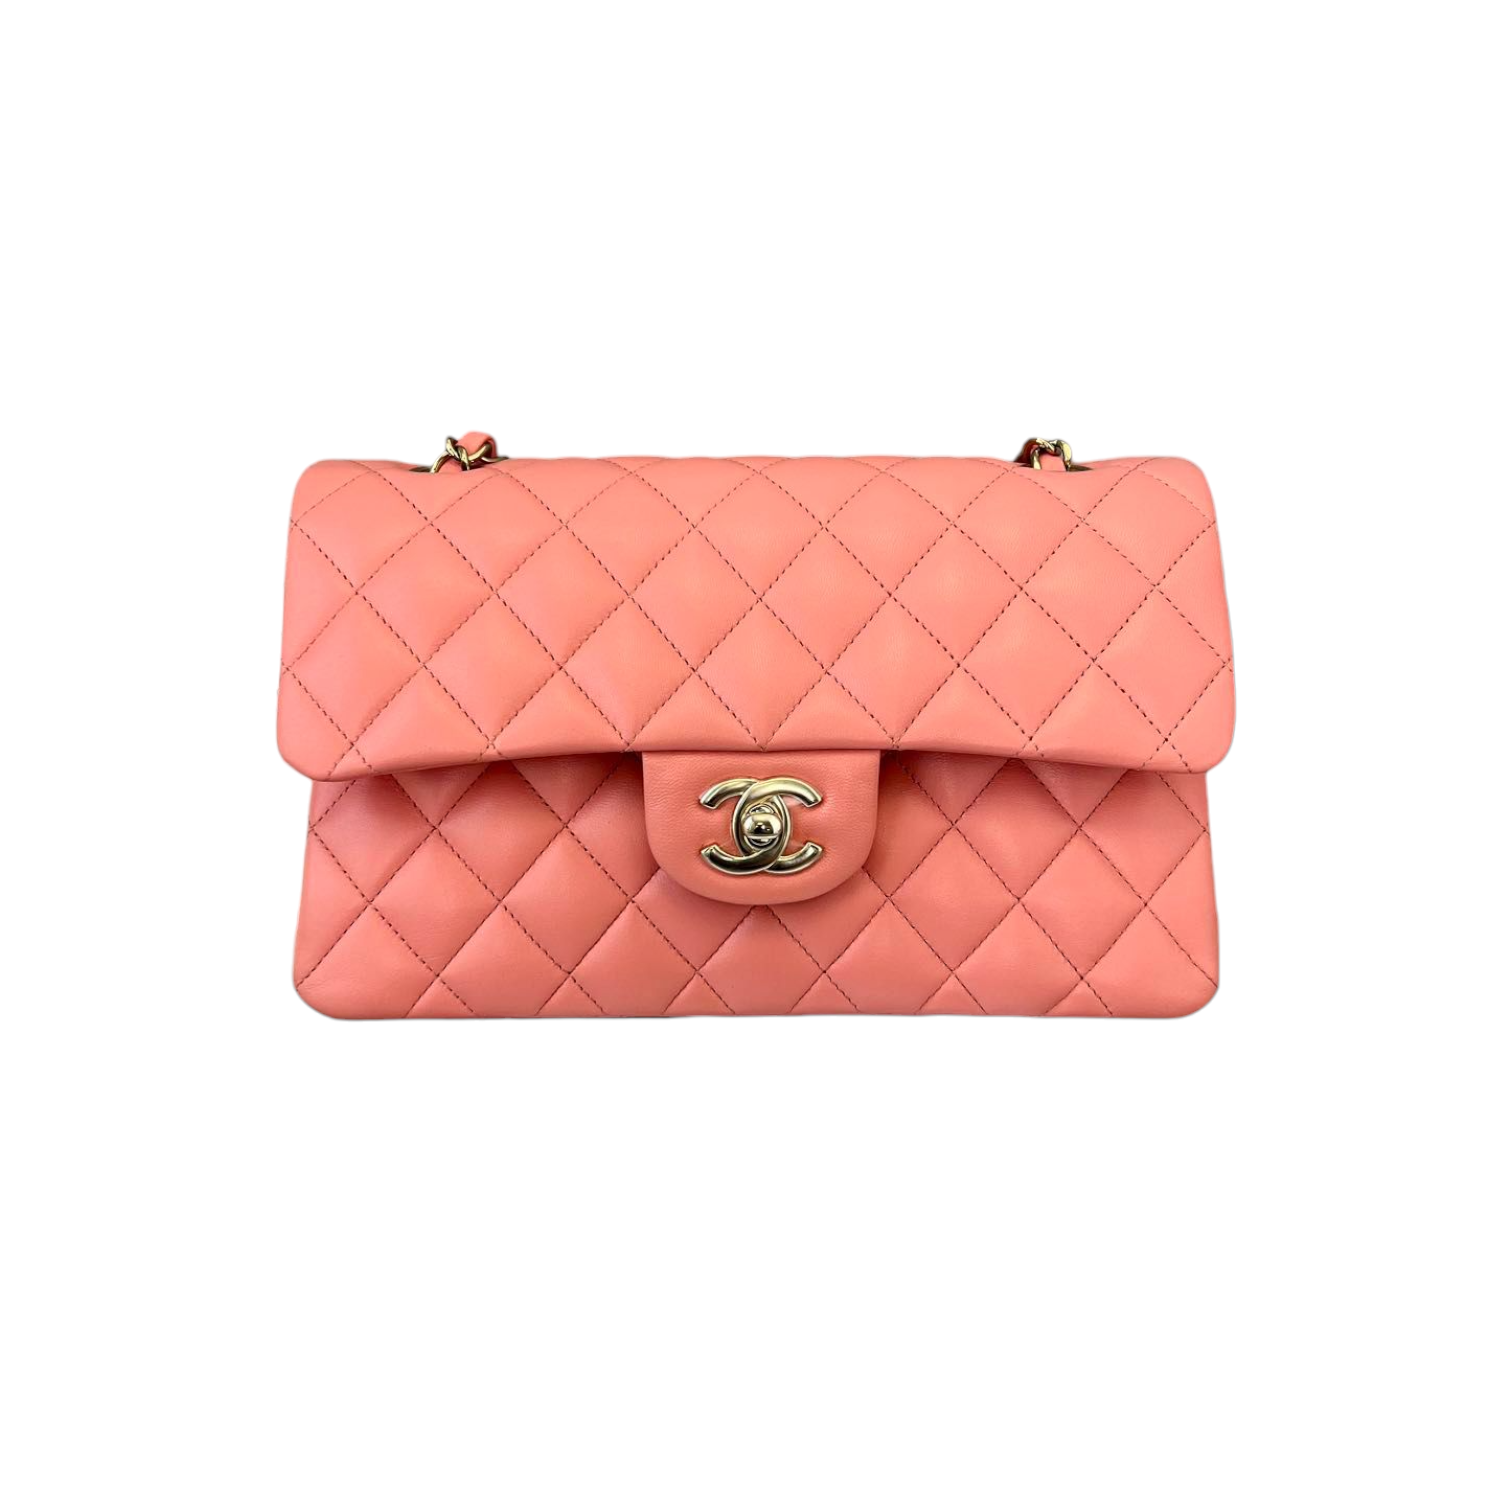 CHANEL, Bags, Rare Chanel Salmon Pink Vintage Chain Tote Quilted Caviar  Medium 24k